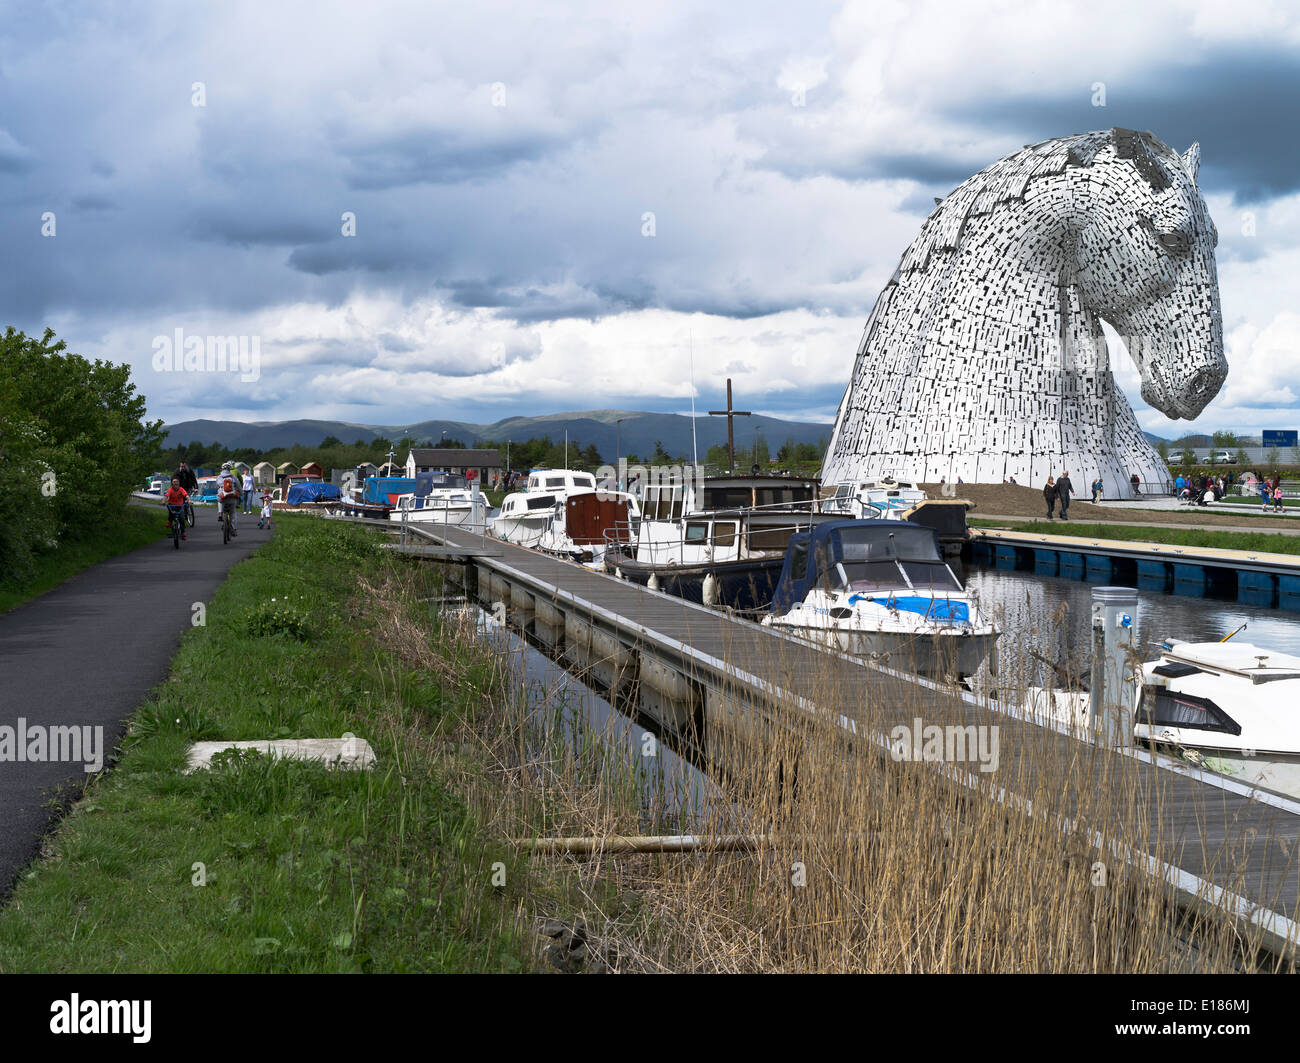 dh Helix Park FALKIRK STIRLINGSHIRE Kelpies statues The Helix Forth and Clyde Canal footpath and boats Stock Photo